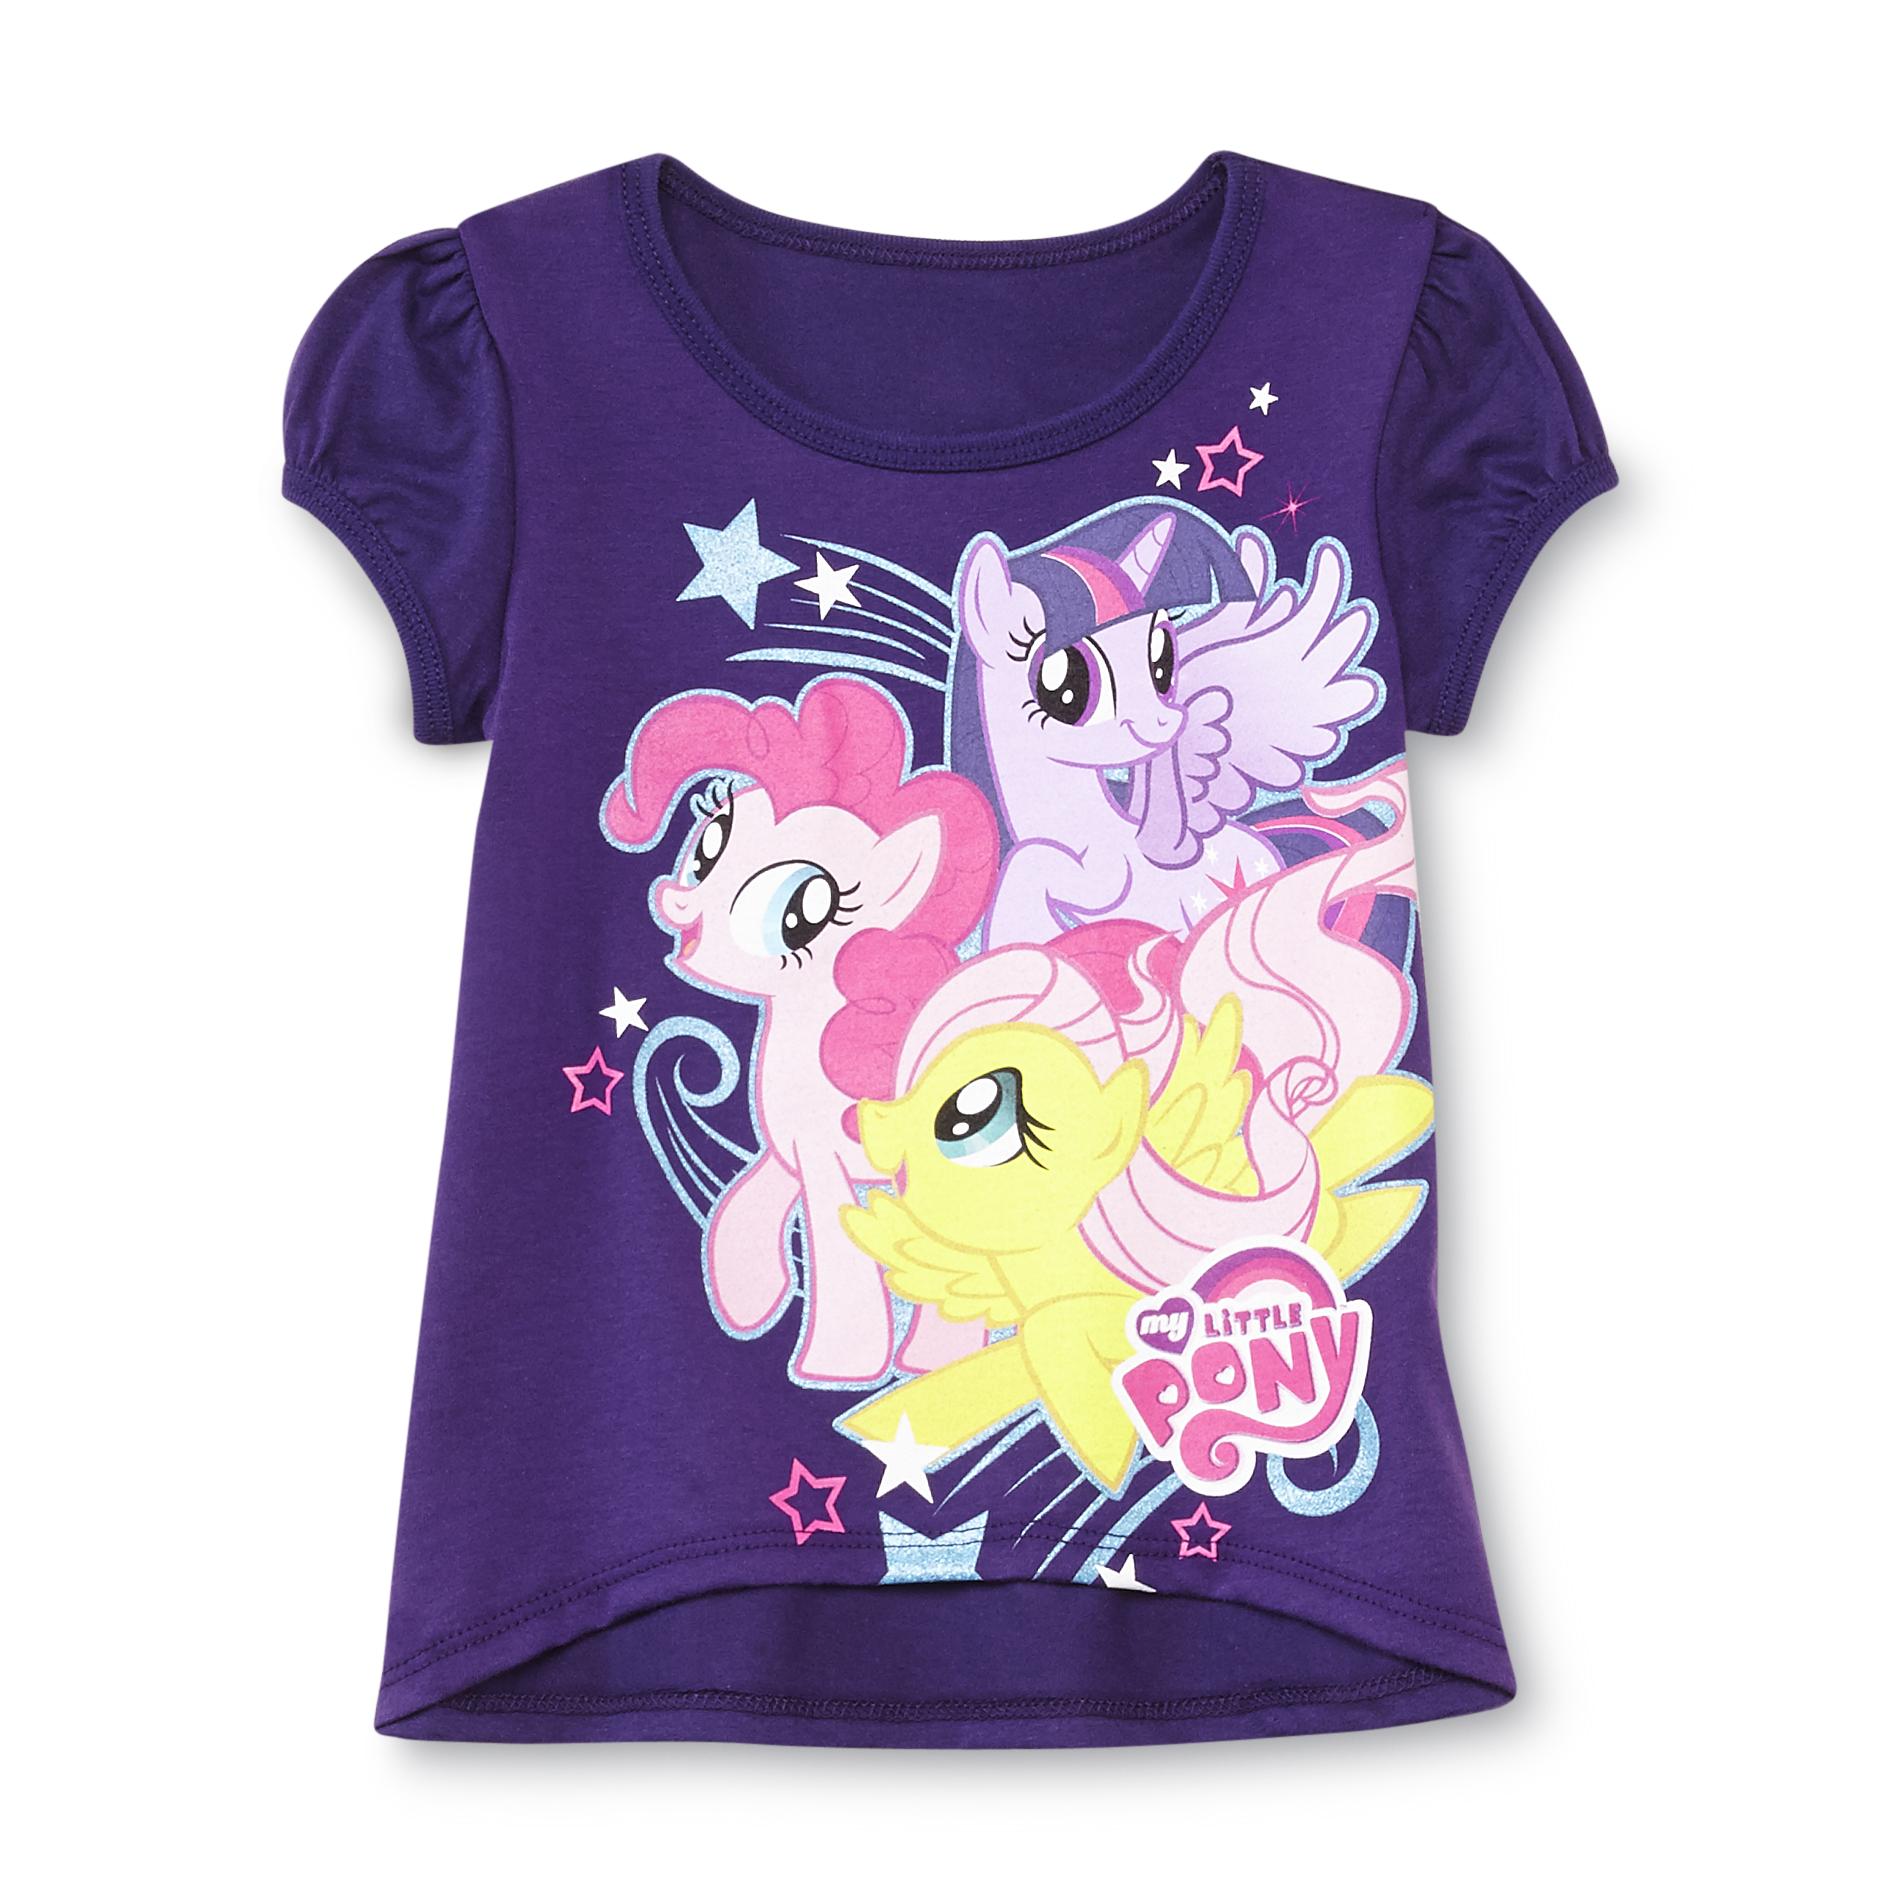 My Little Pony Toddler Girl's High-Low T-Shirt